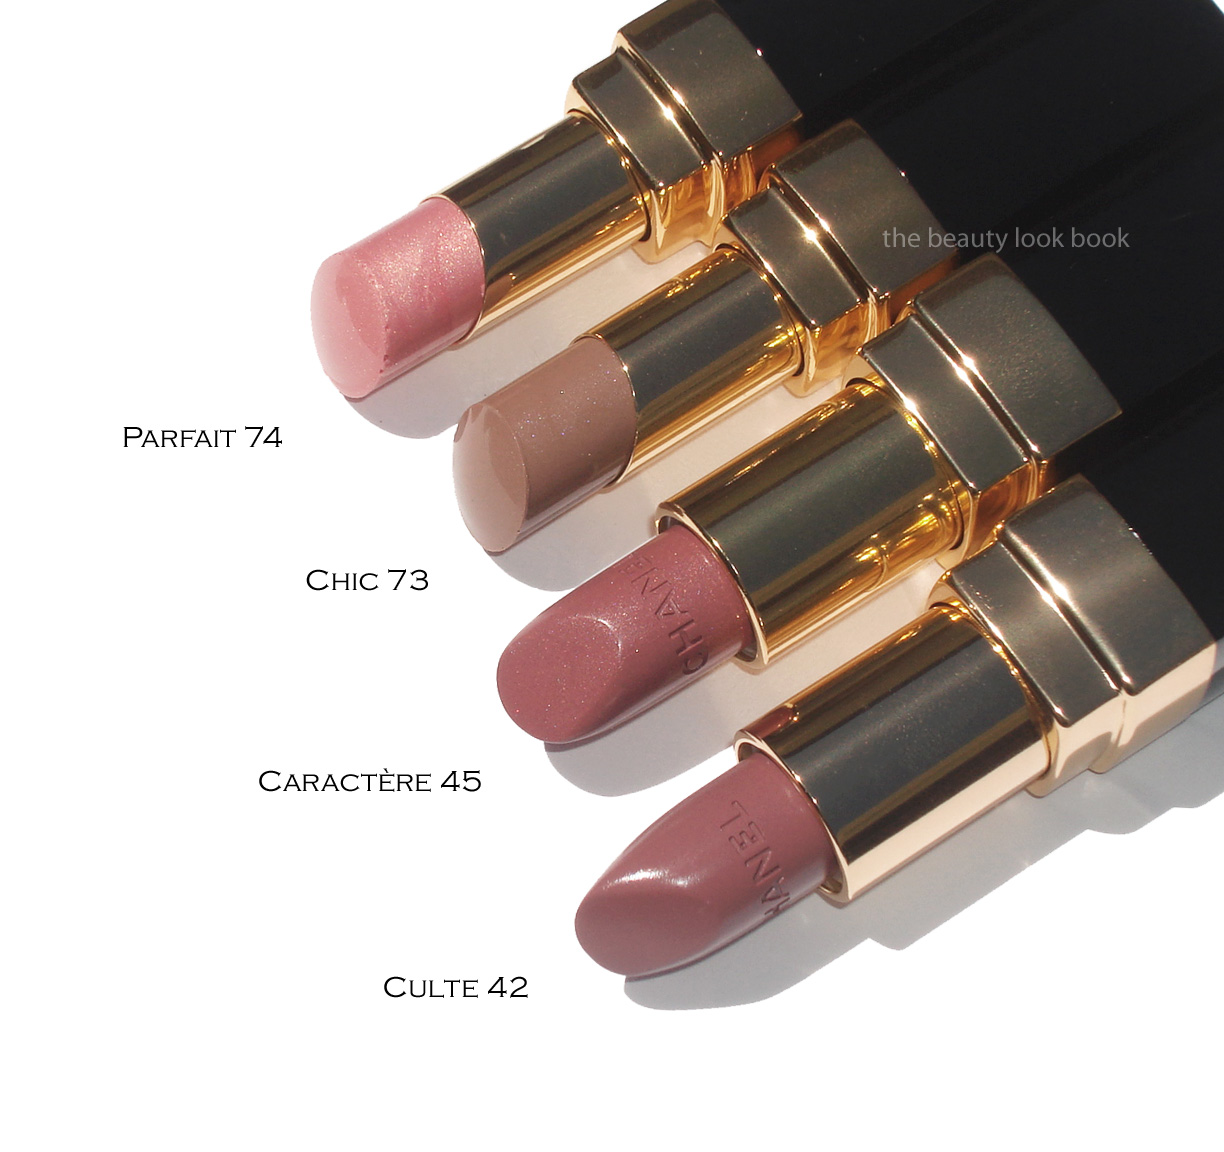 Chanel Caractère #45 Rouge Coco, Chic #73 and Parfait #74 Rouge Coco Shines  - The Beauty Look Book